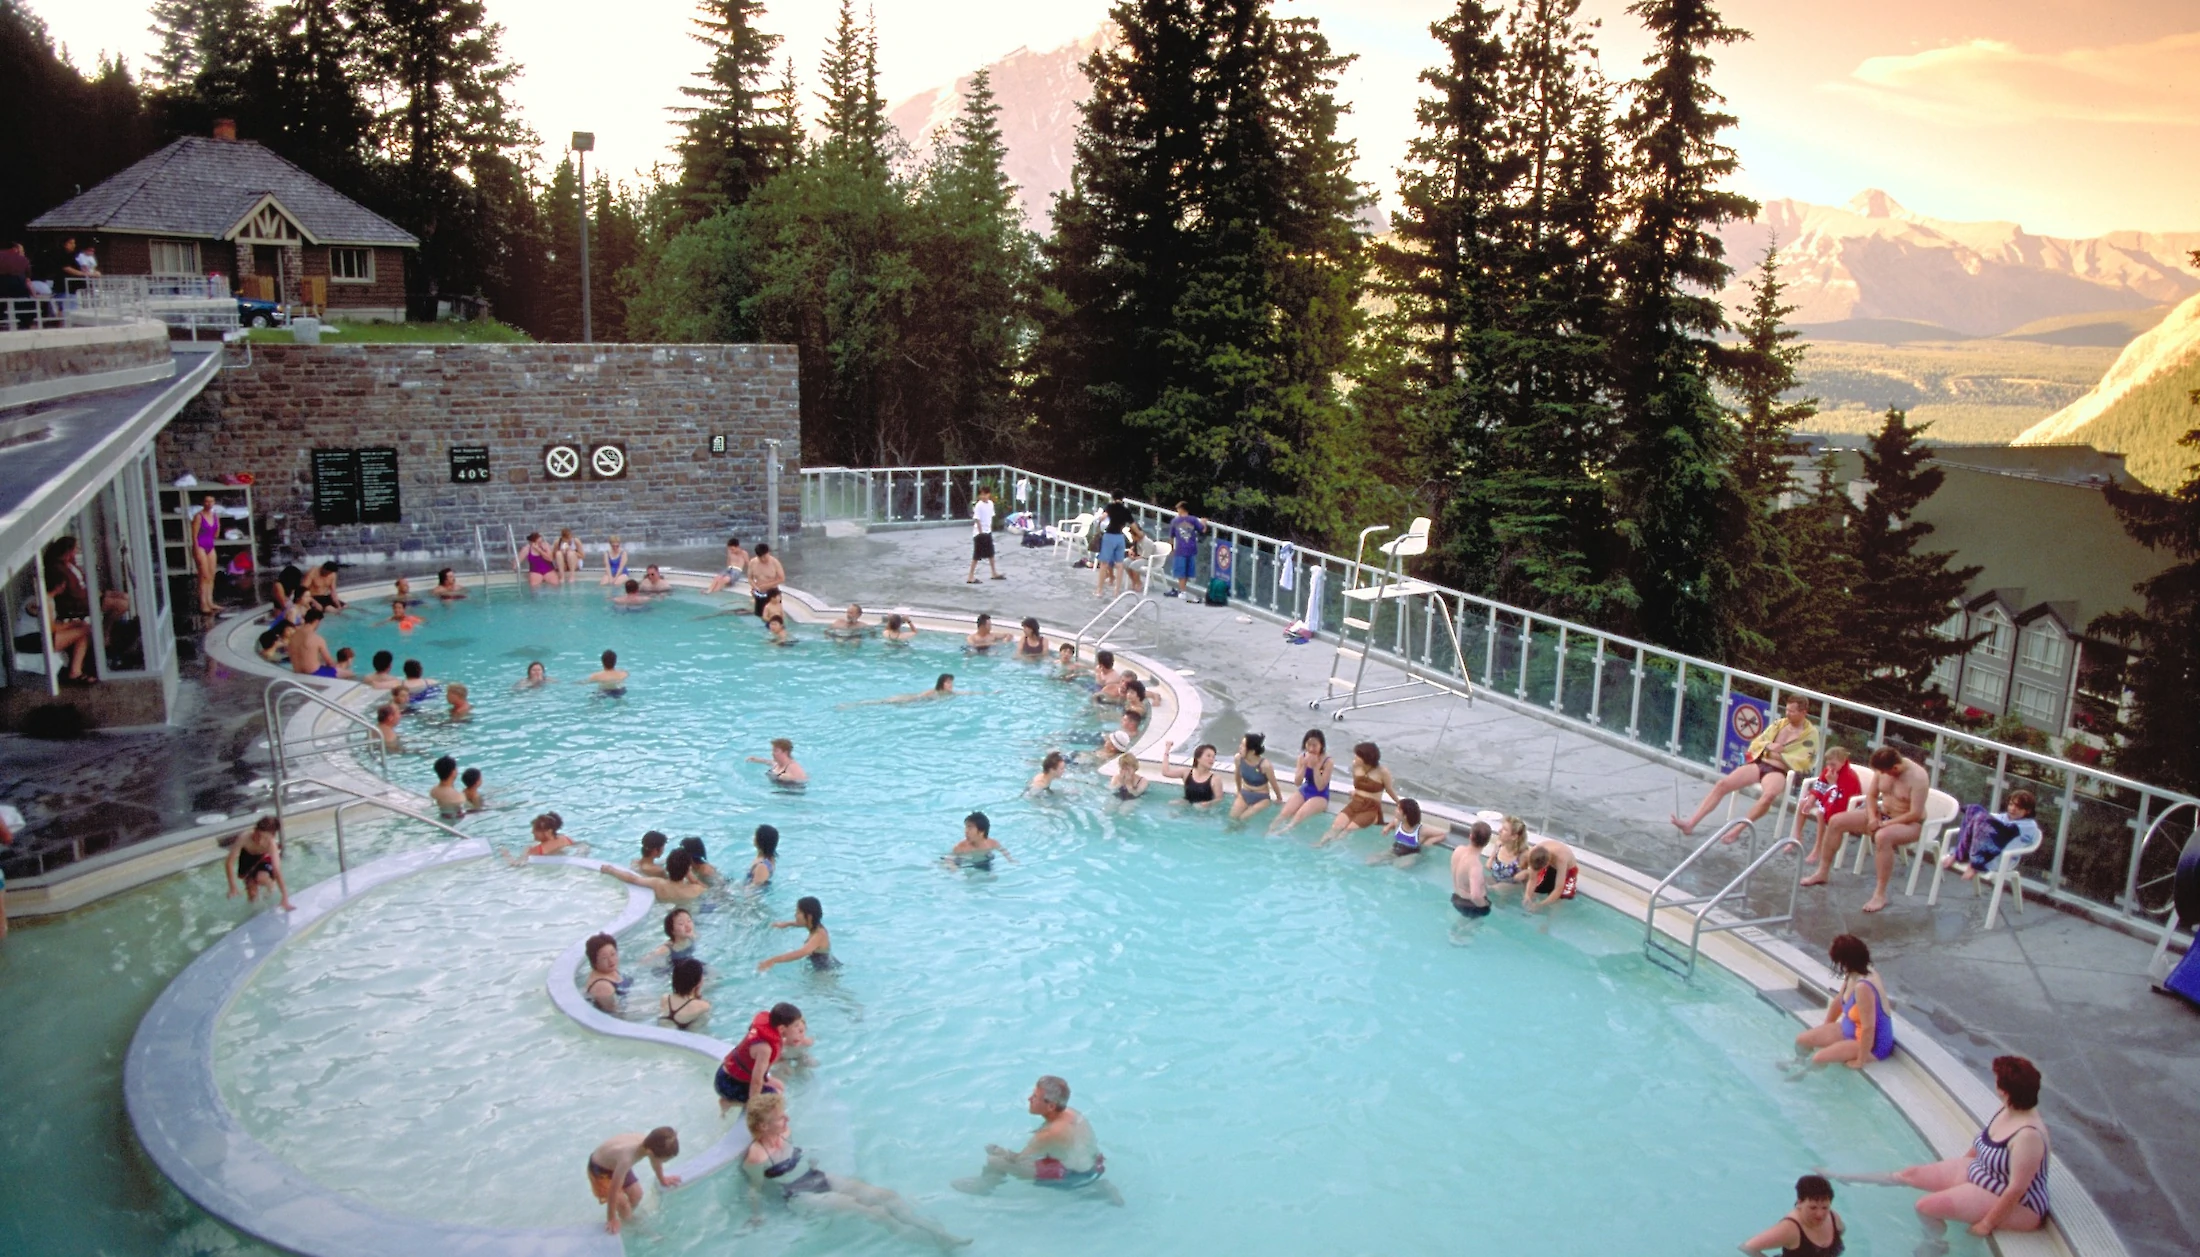 View crowd bathing in the hot mineral water at Banff Hot Springs